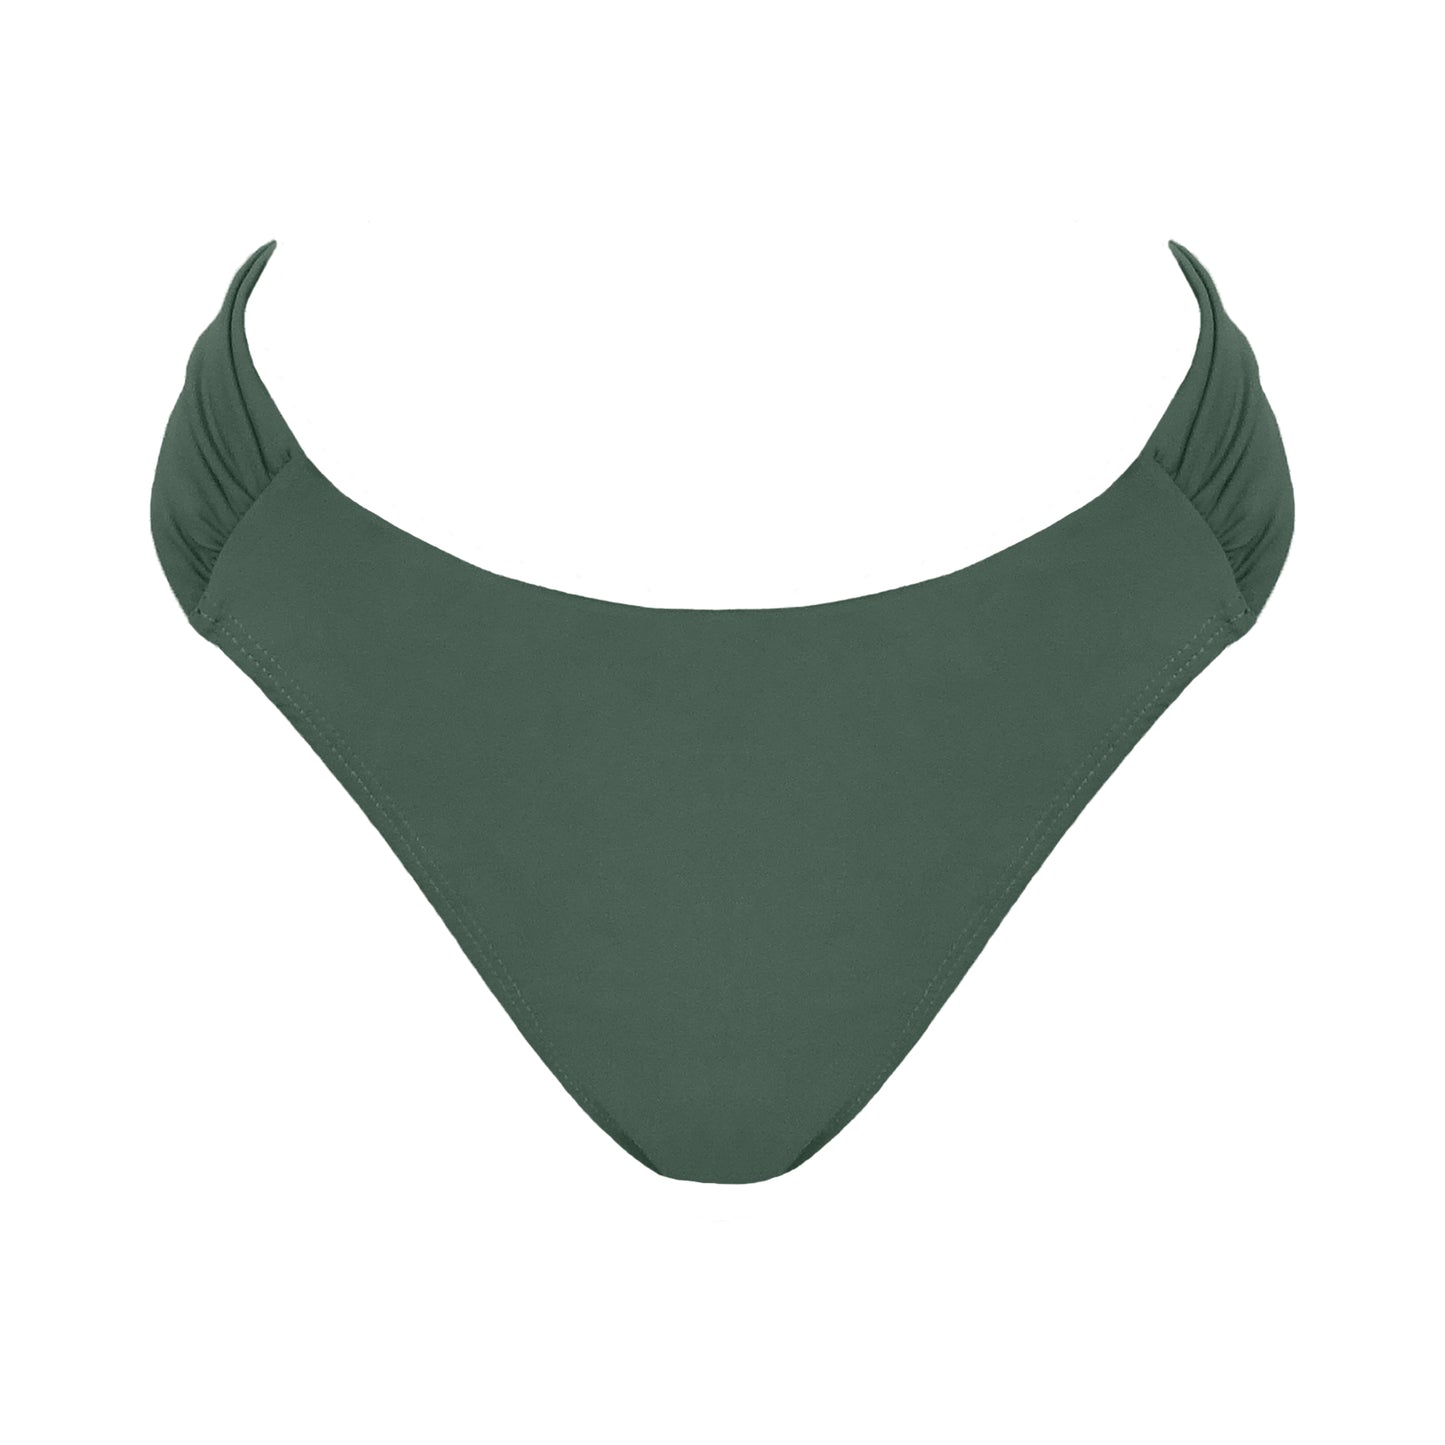 Sage Green Mid rise bikini bottom with cheeky coverage and wide gathered sides.